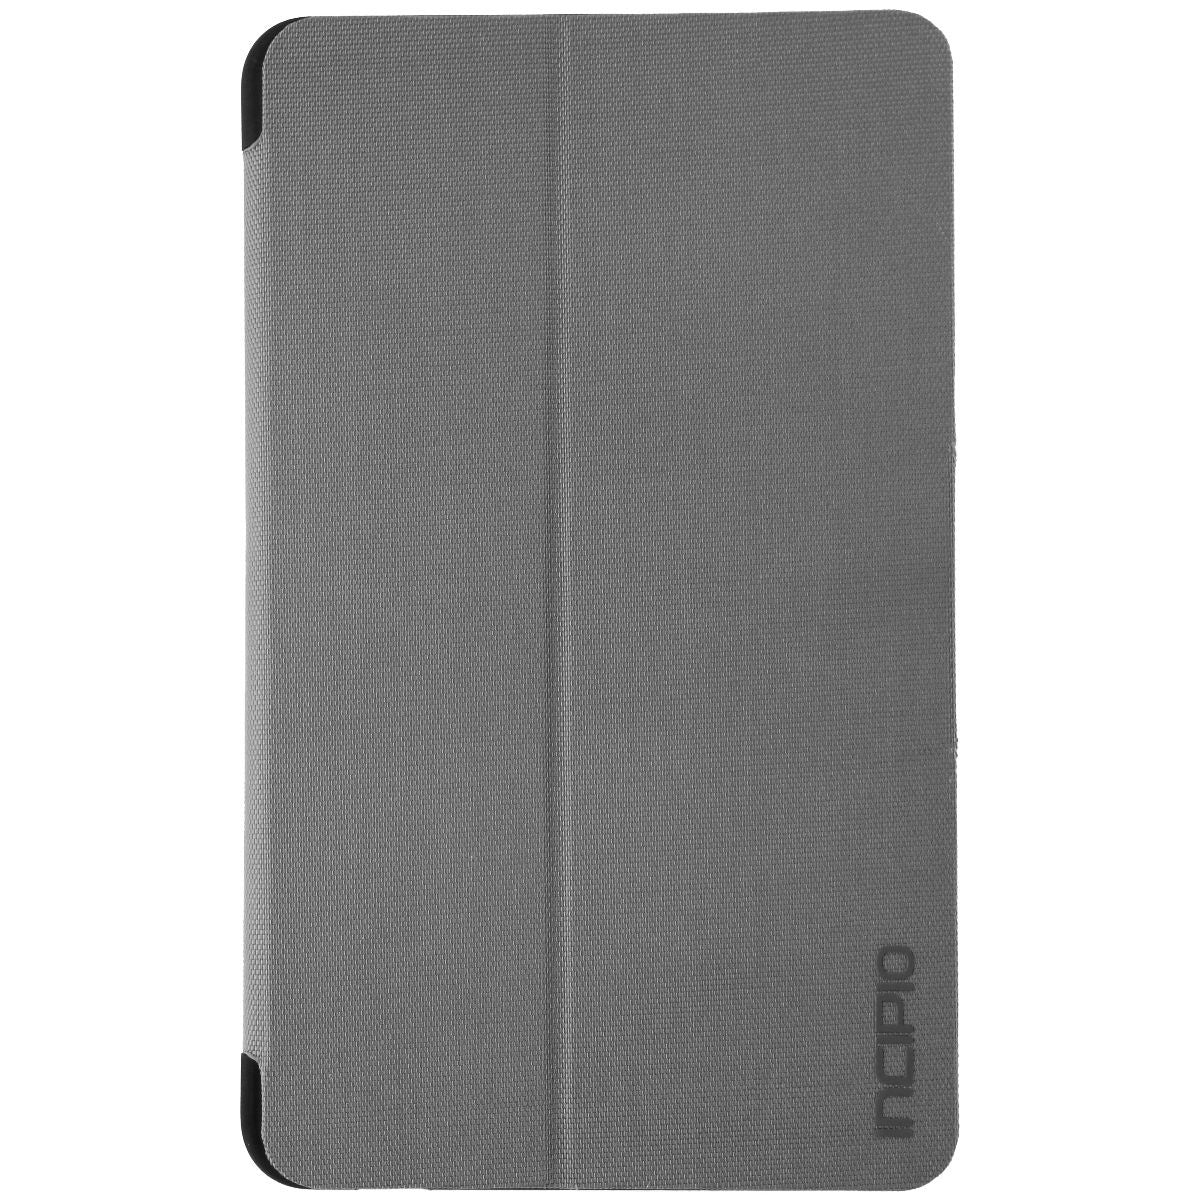 Incipio Clarion Series Folio Shock Absorbing Gel Case for AT&T Trek 2 HD - Gray iPad/Tablet Accessories - Cases, Covers, Keyboard Folios Incipio    - Simple Cell Bulk Wholesale Pricing - USA Seller